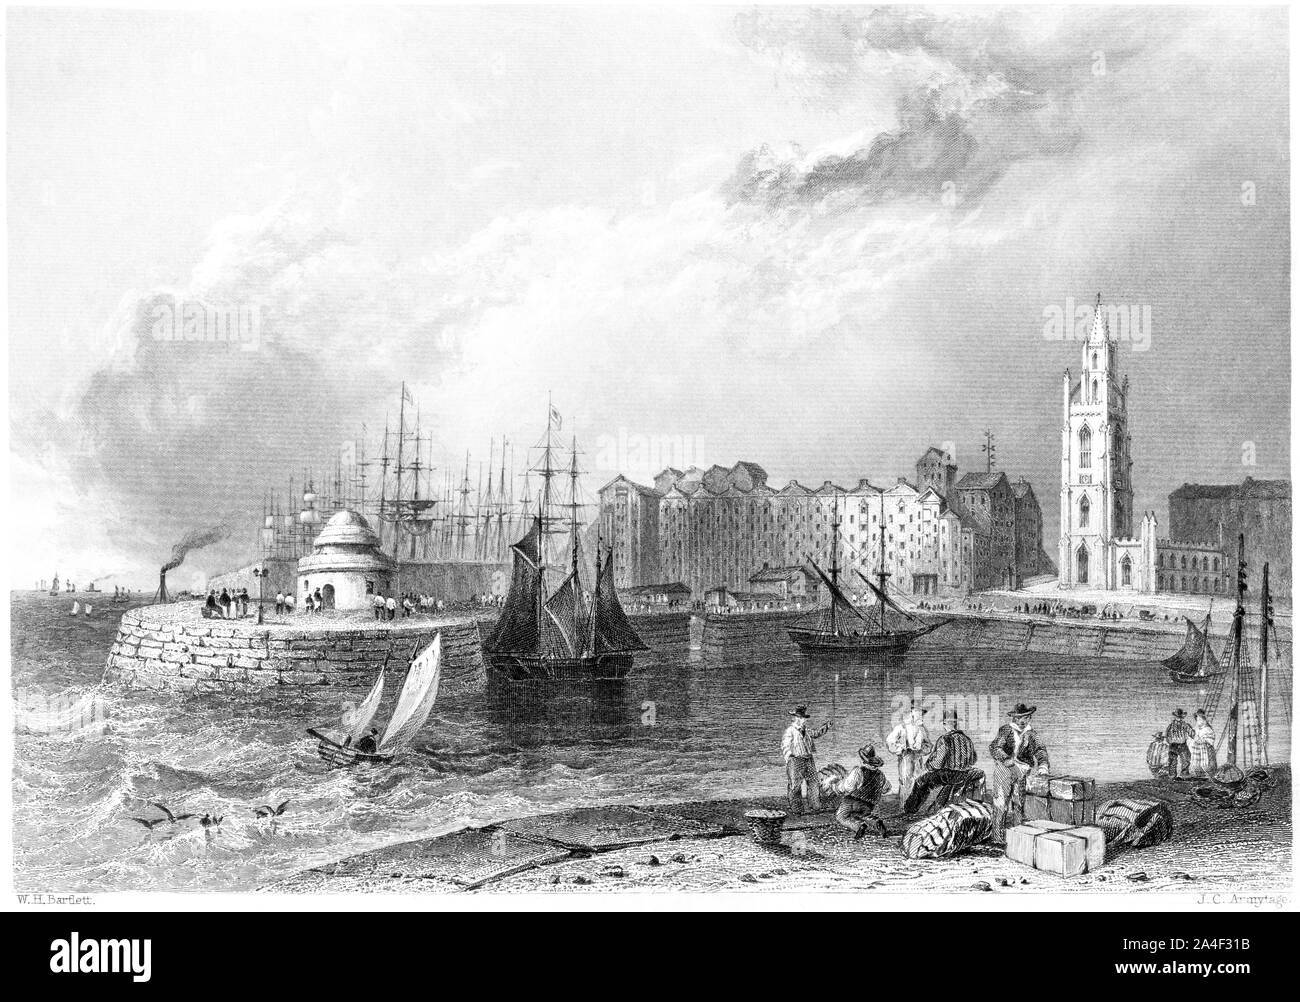 An engraving of St Nicholas' Church, Liverpool from St George's Basin scanned at high resolution from a book printed in 1842. Believed copyright free. Stock Photo